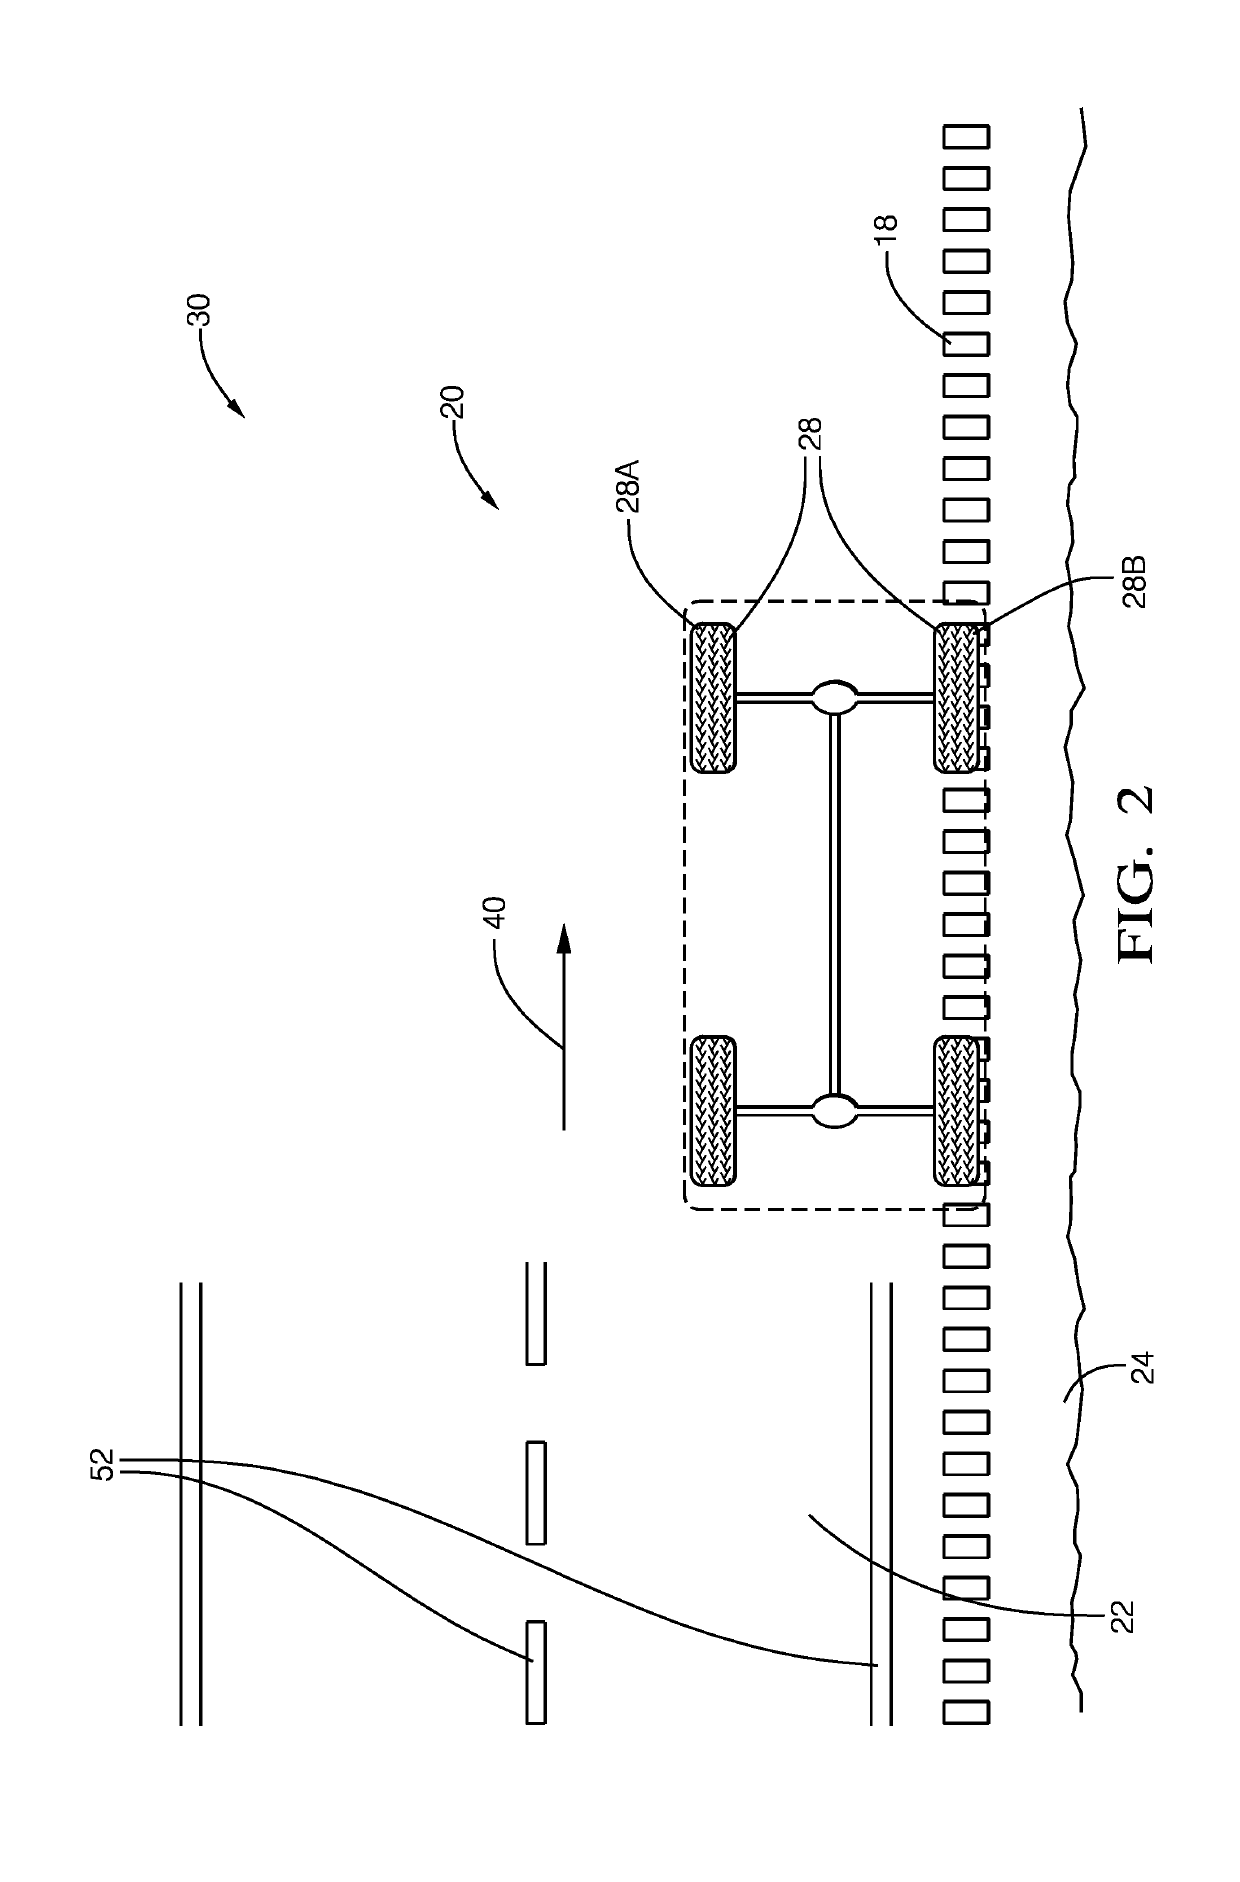 Rumble strip following for automated vehicle steering